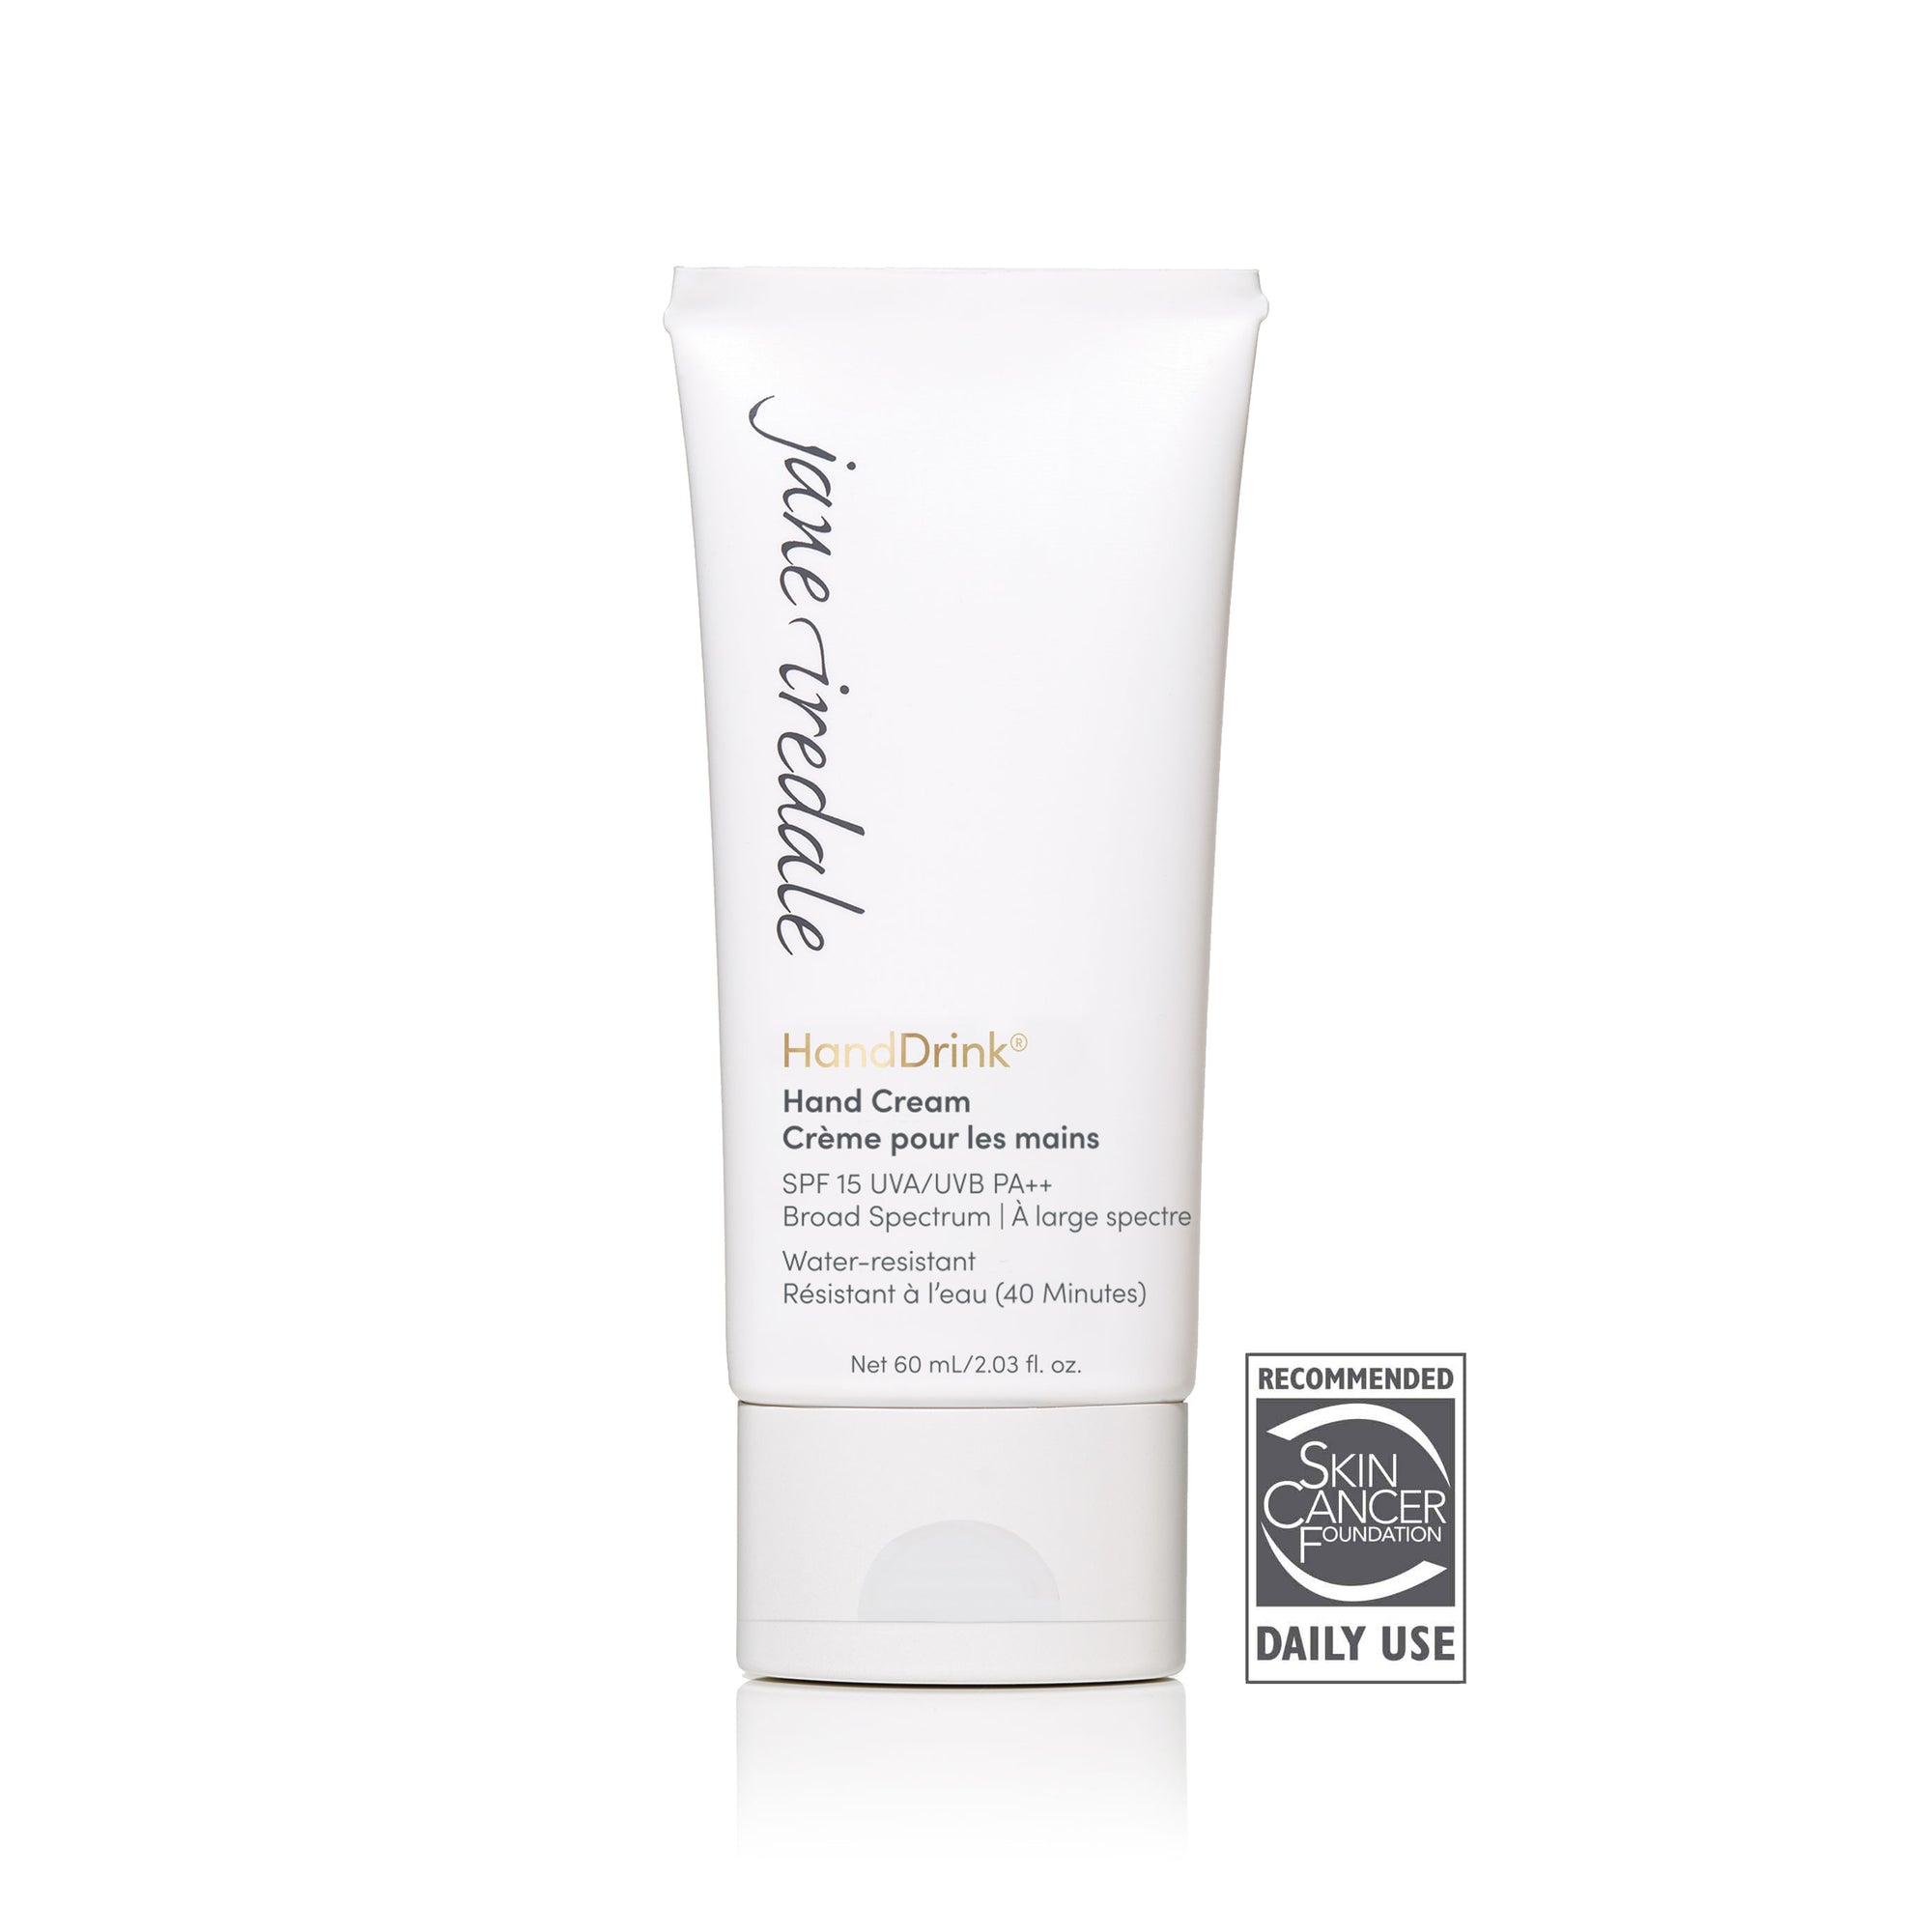  Jane iredale Hand Drink Hand Cream With SPF 15